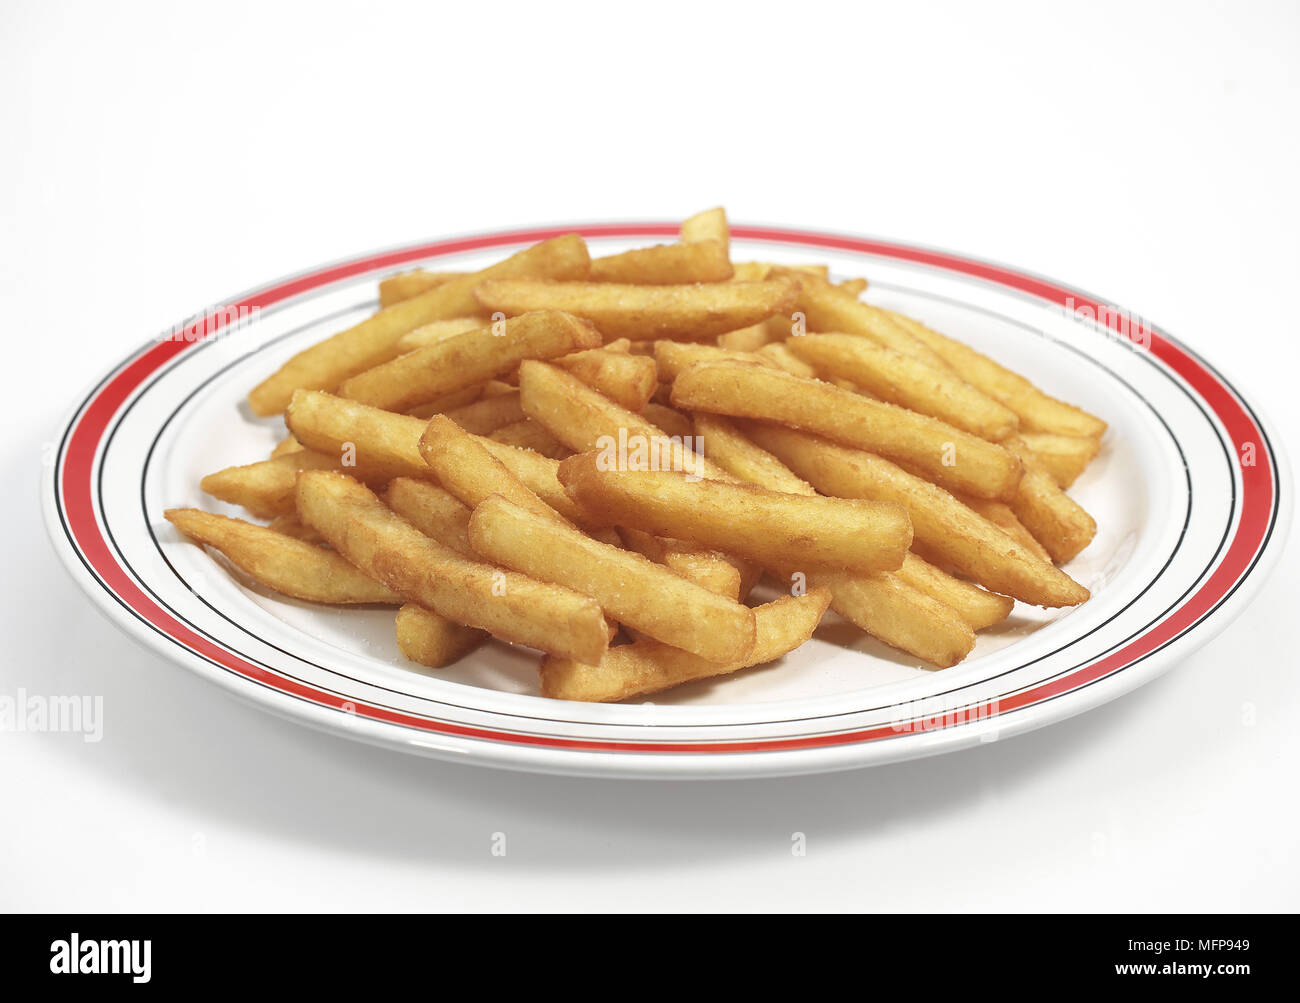 Plate with French Fries against White Background Stock Photo